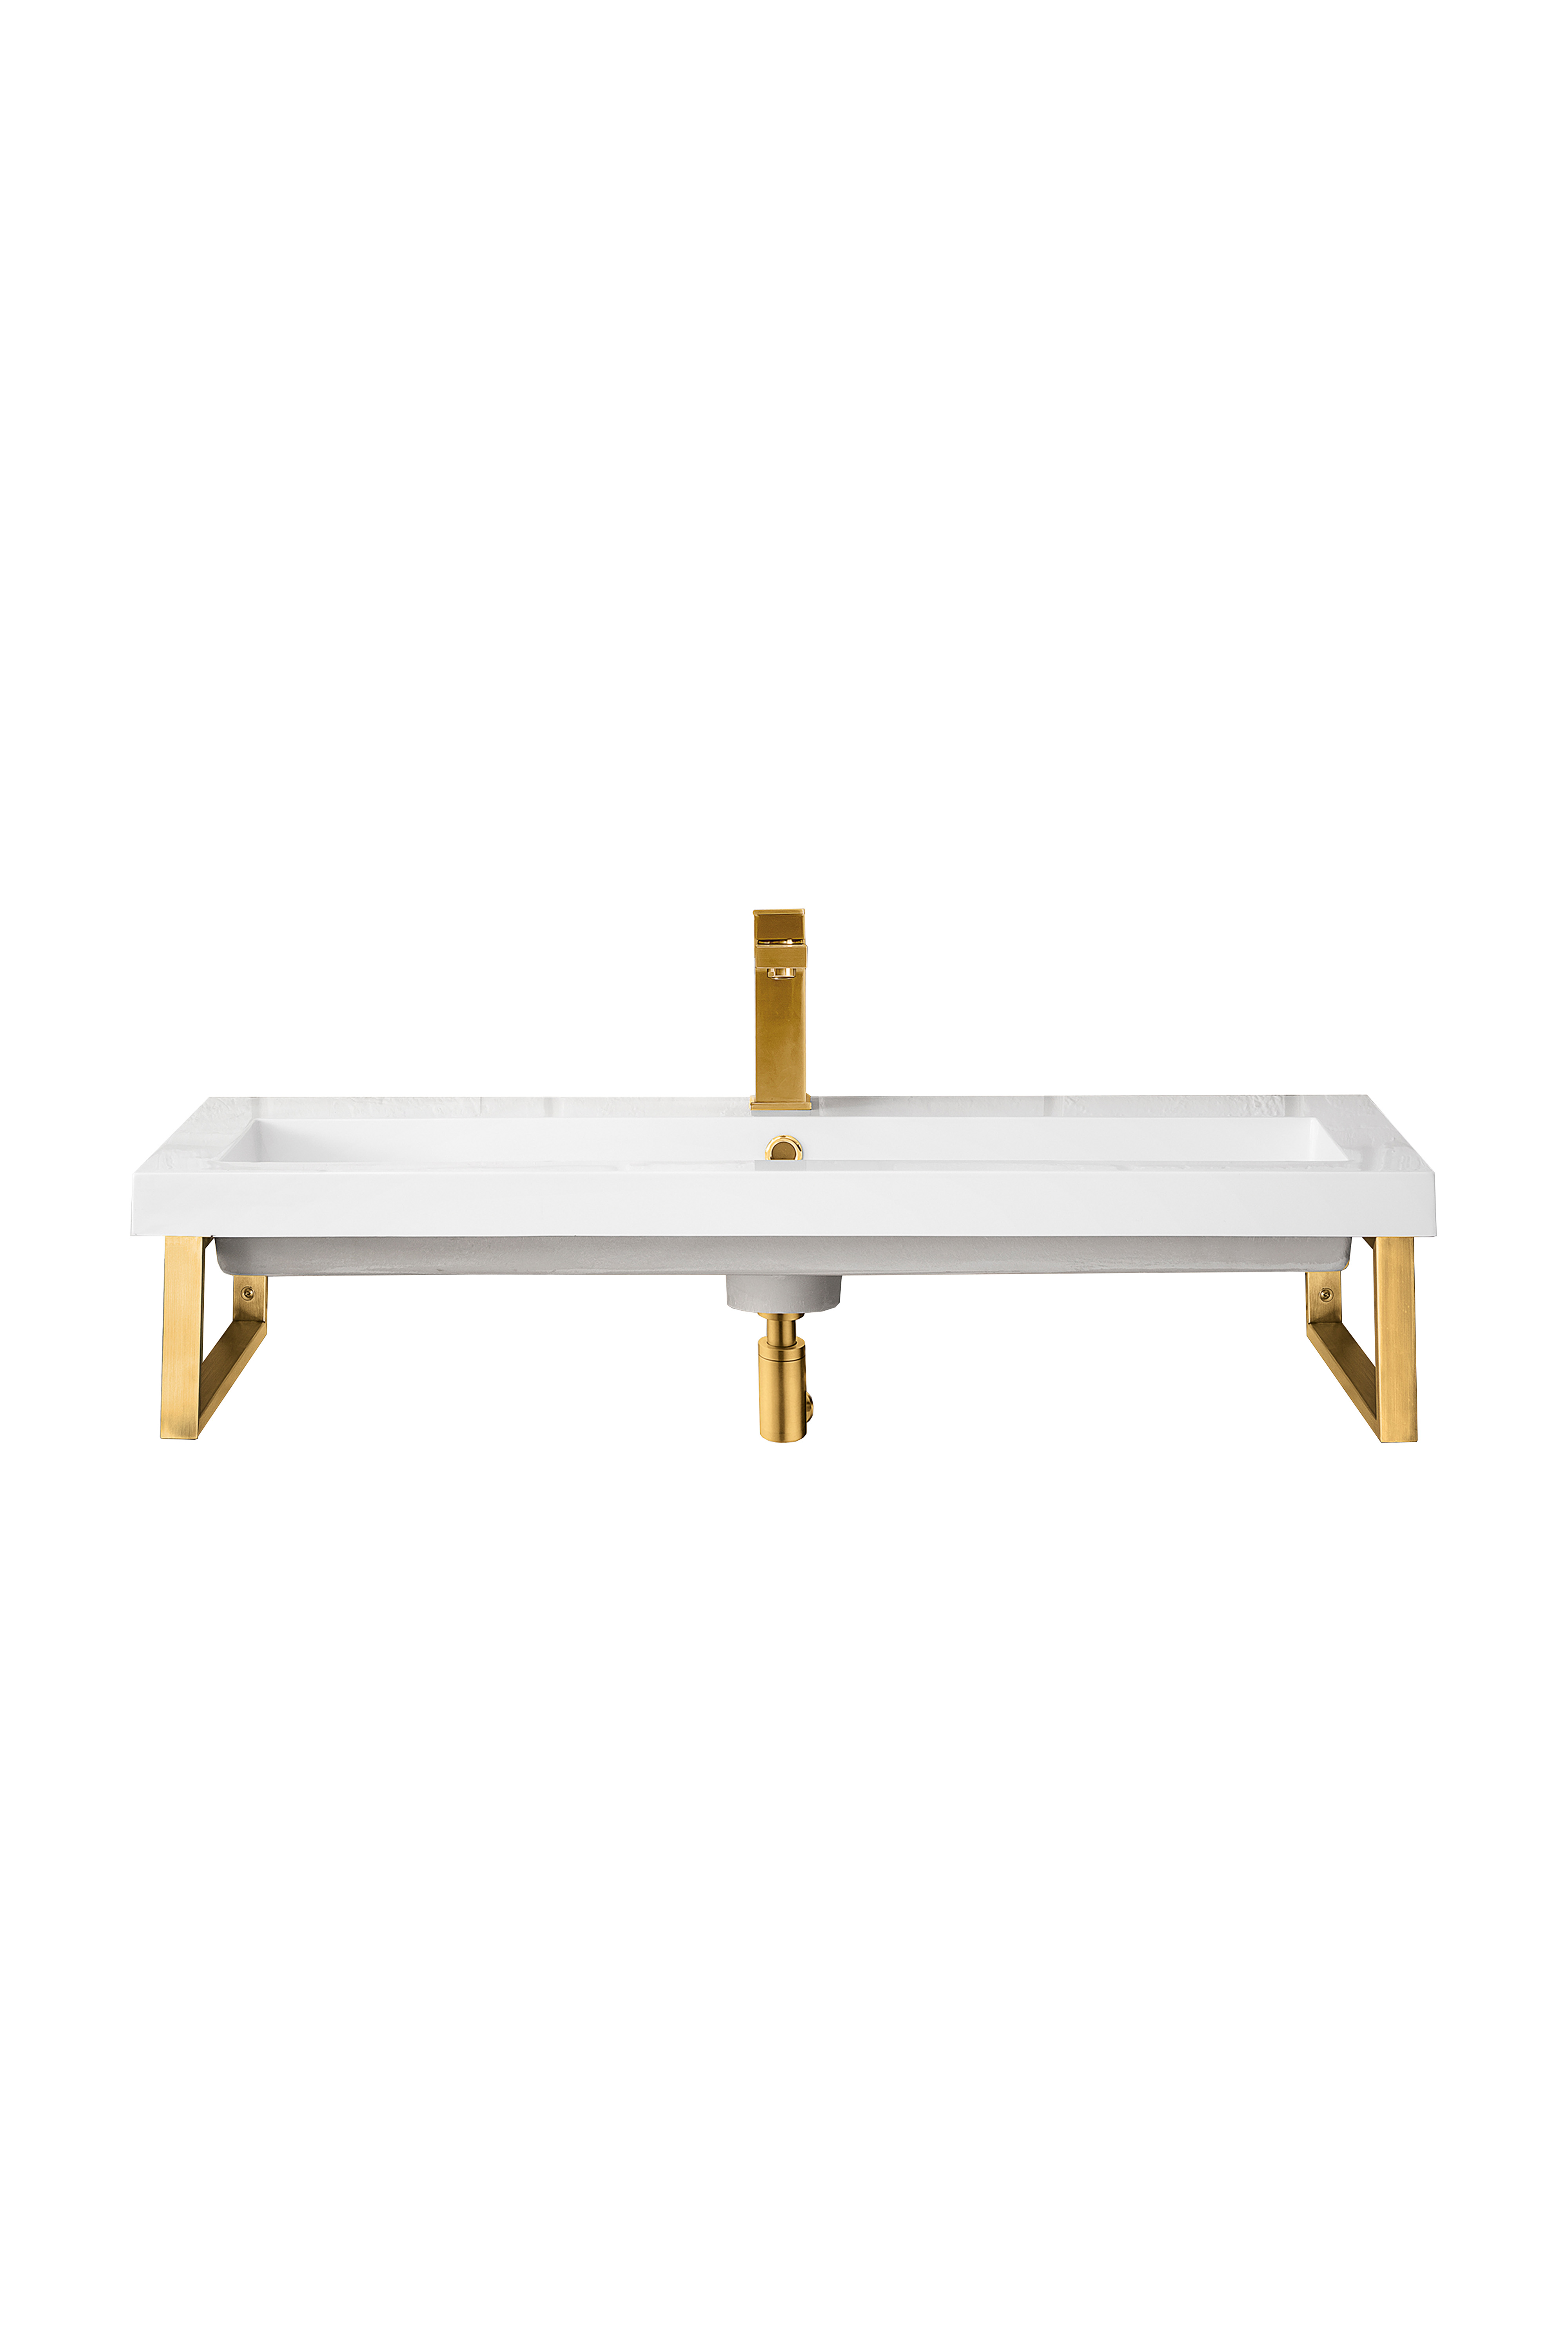 James Martin 055BK16RGD39.5WG2 Two Boston 15 1/4" Wall Brackets, Radiant Gold w/39.5" White Glossy Composite Countertop